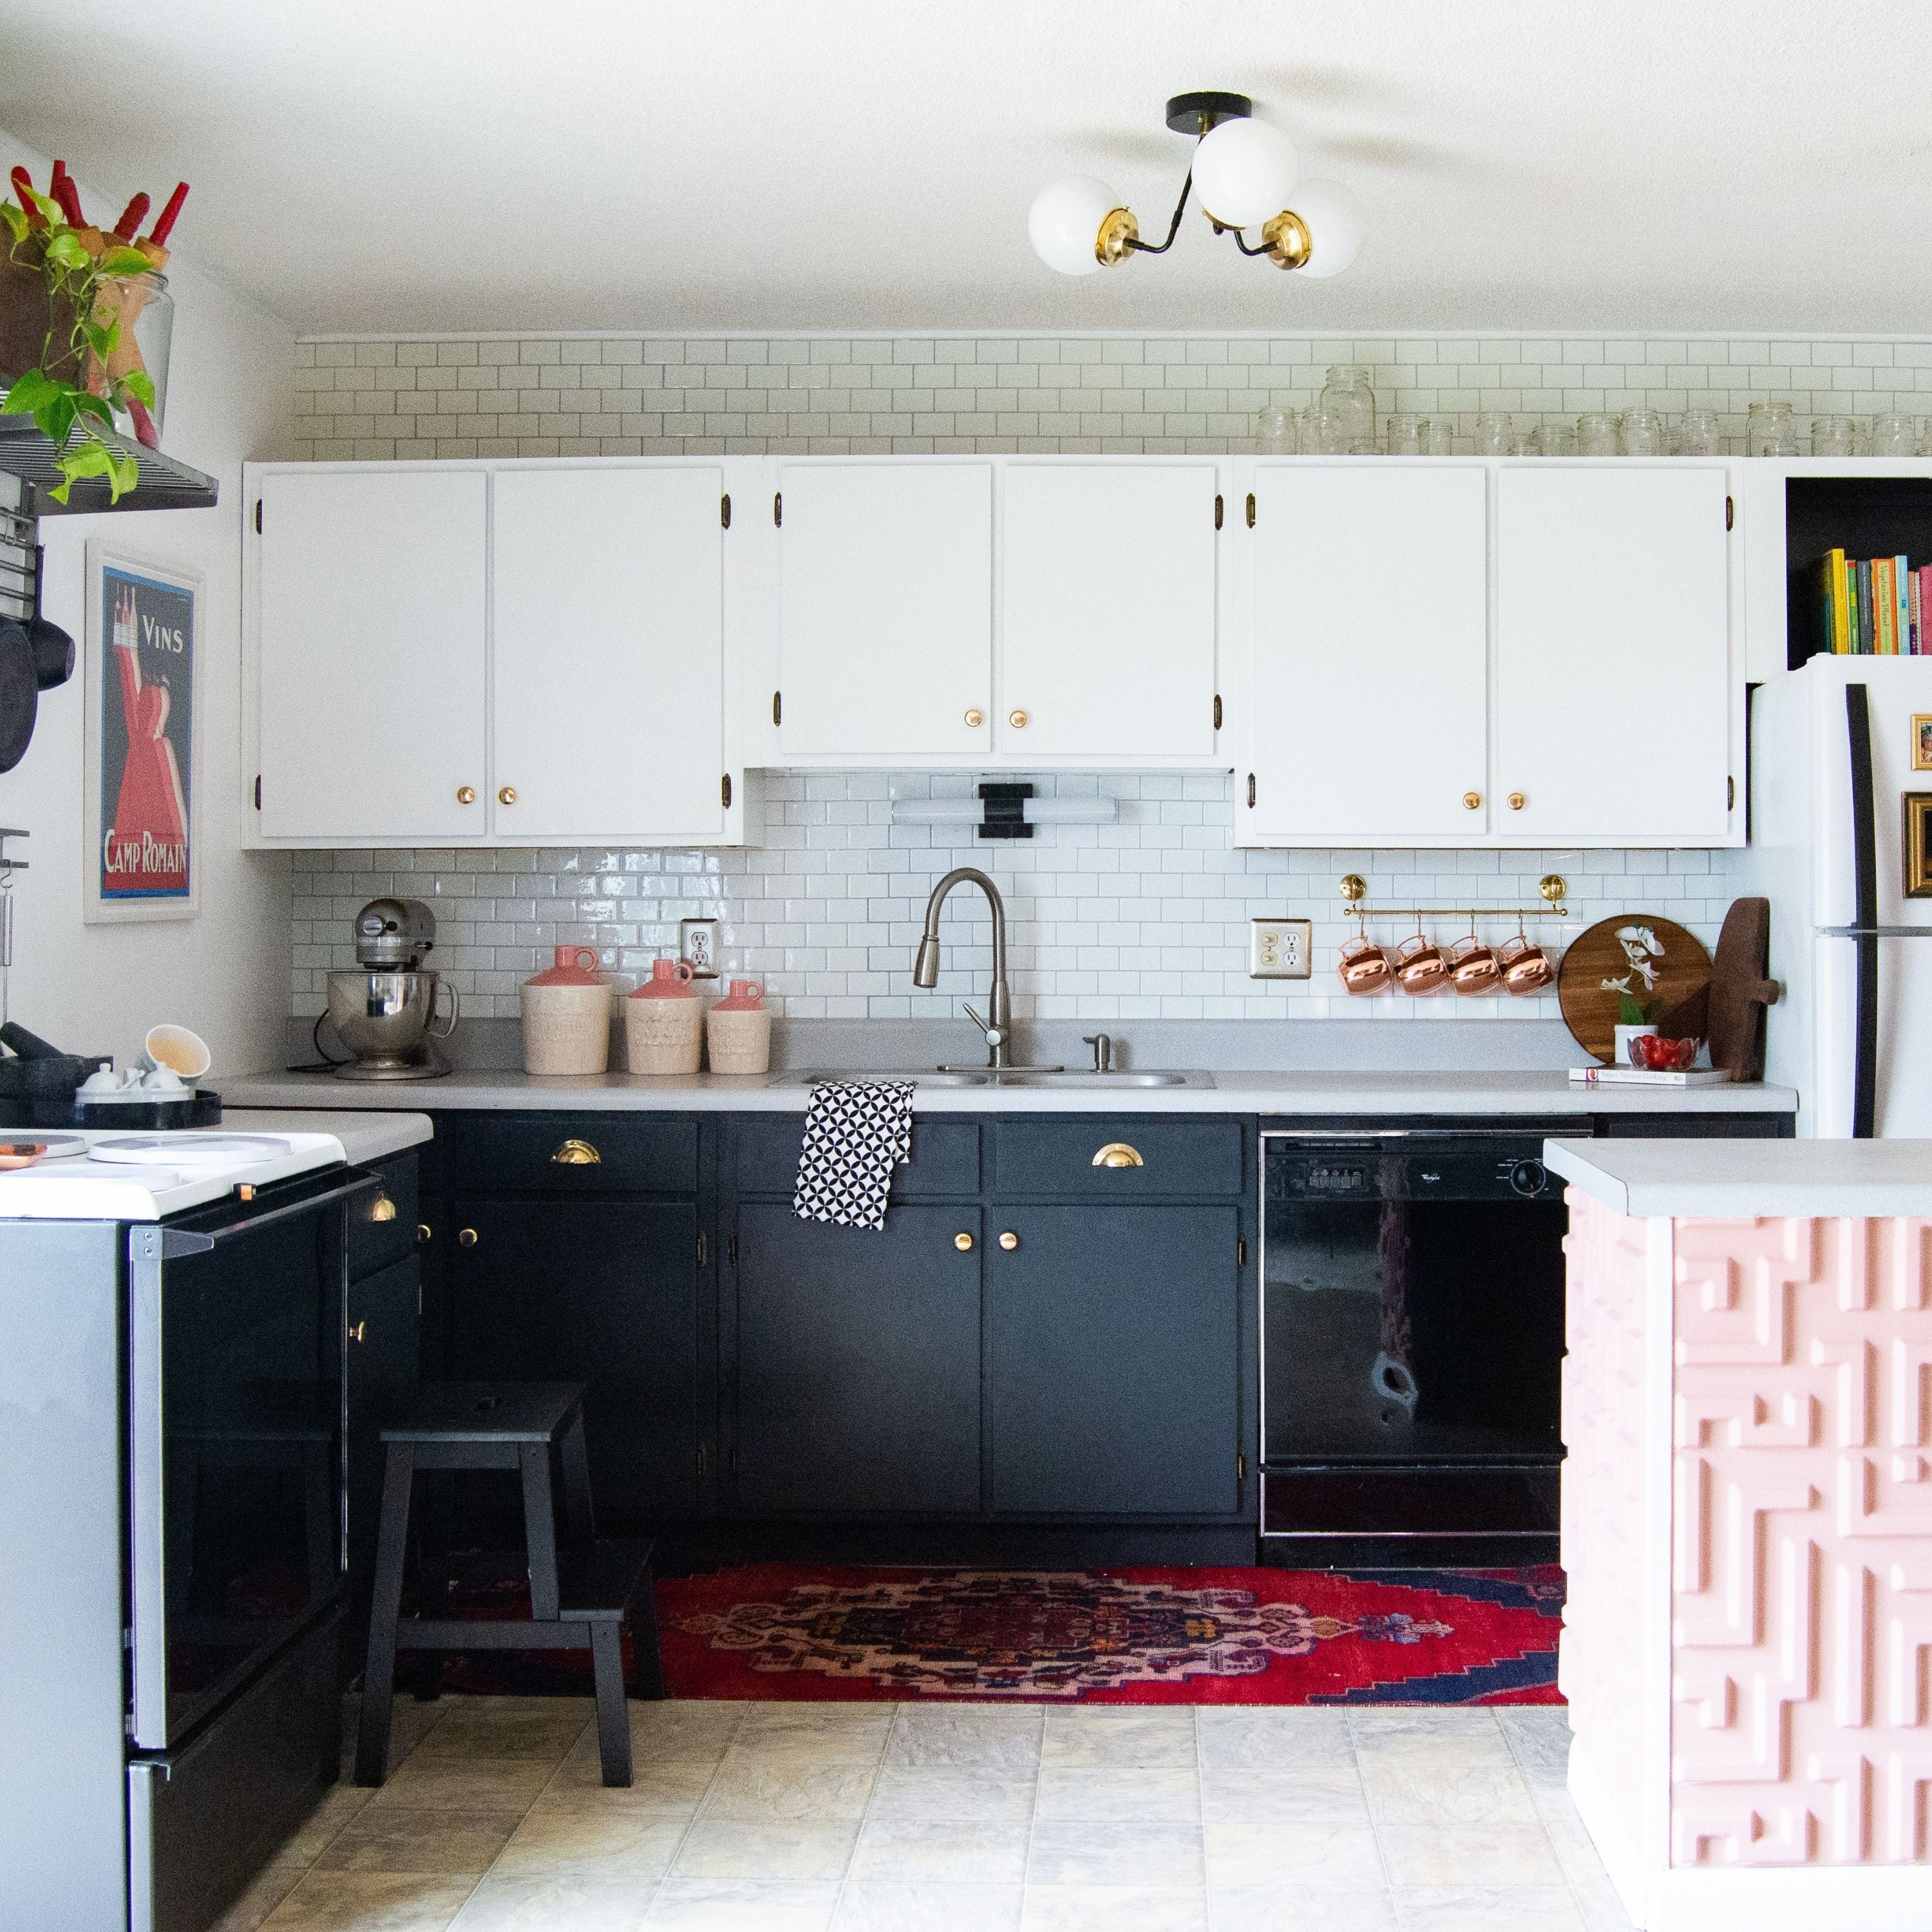 Kitchen decor mistakes to avoid that can put off buyers, according